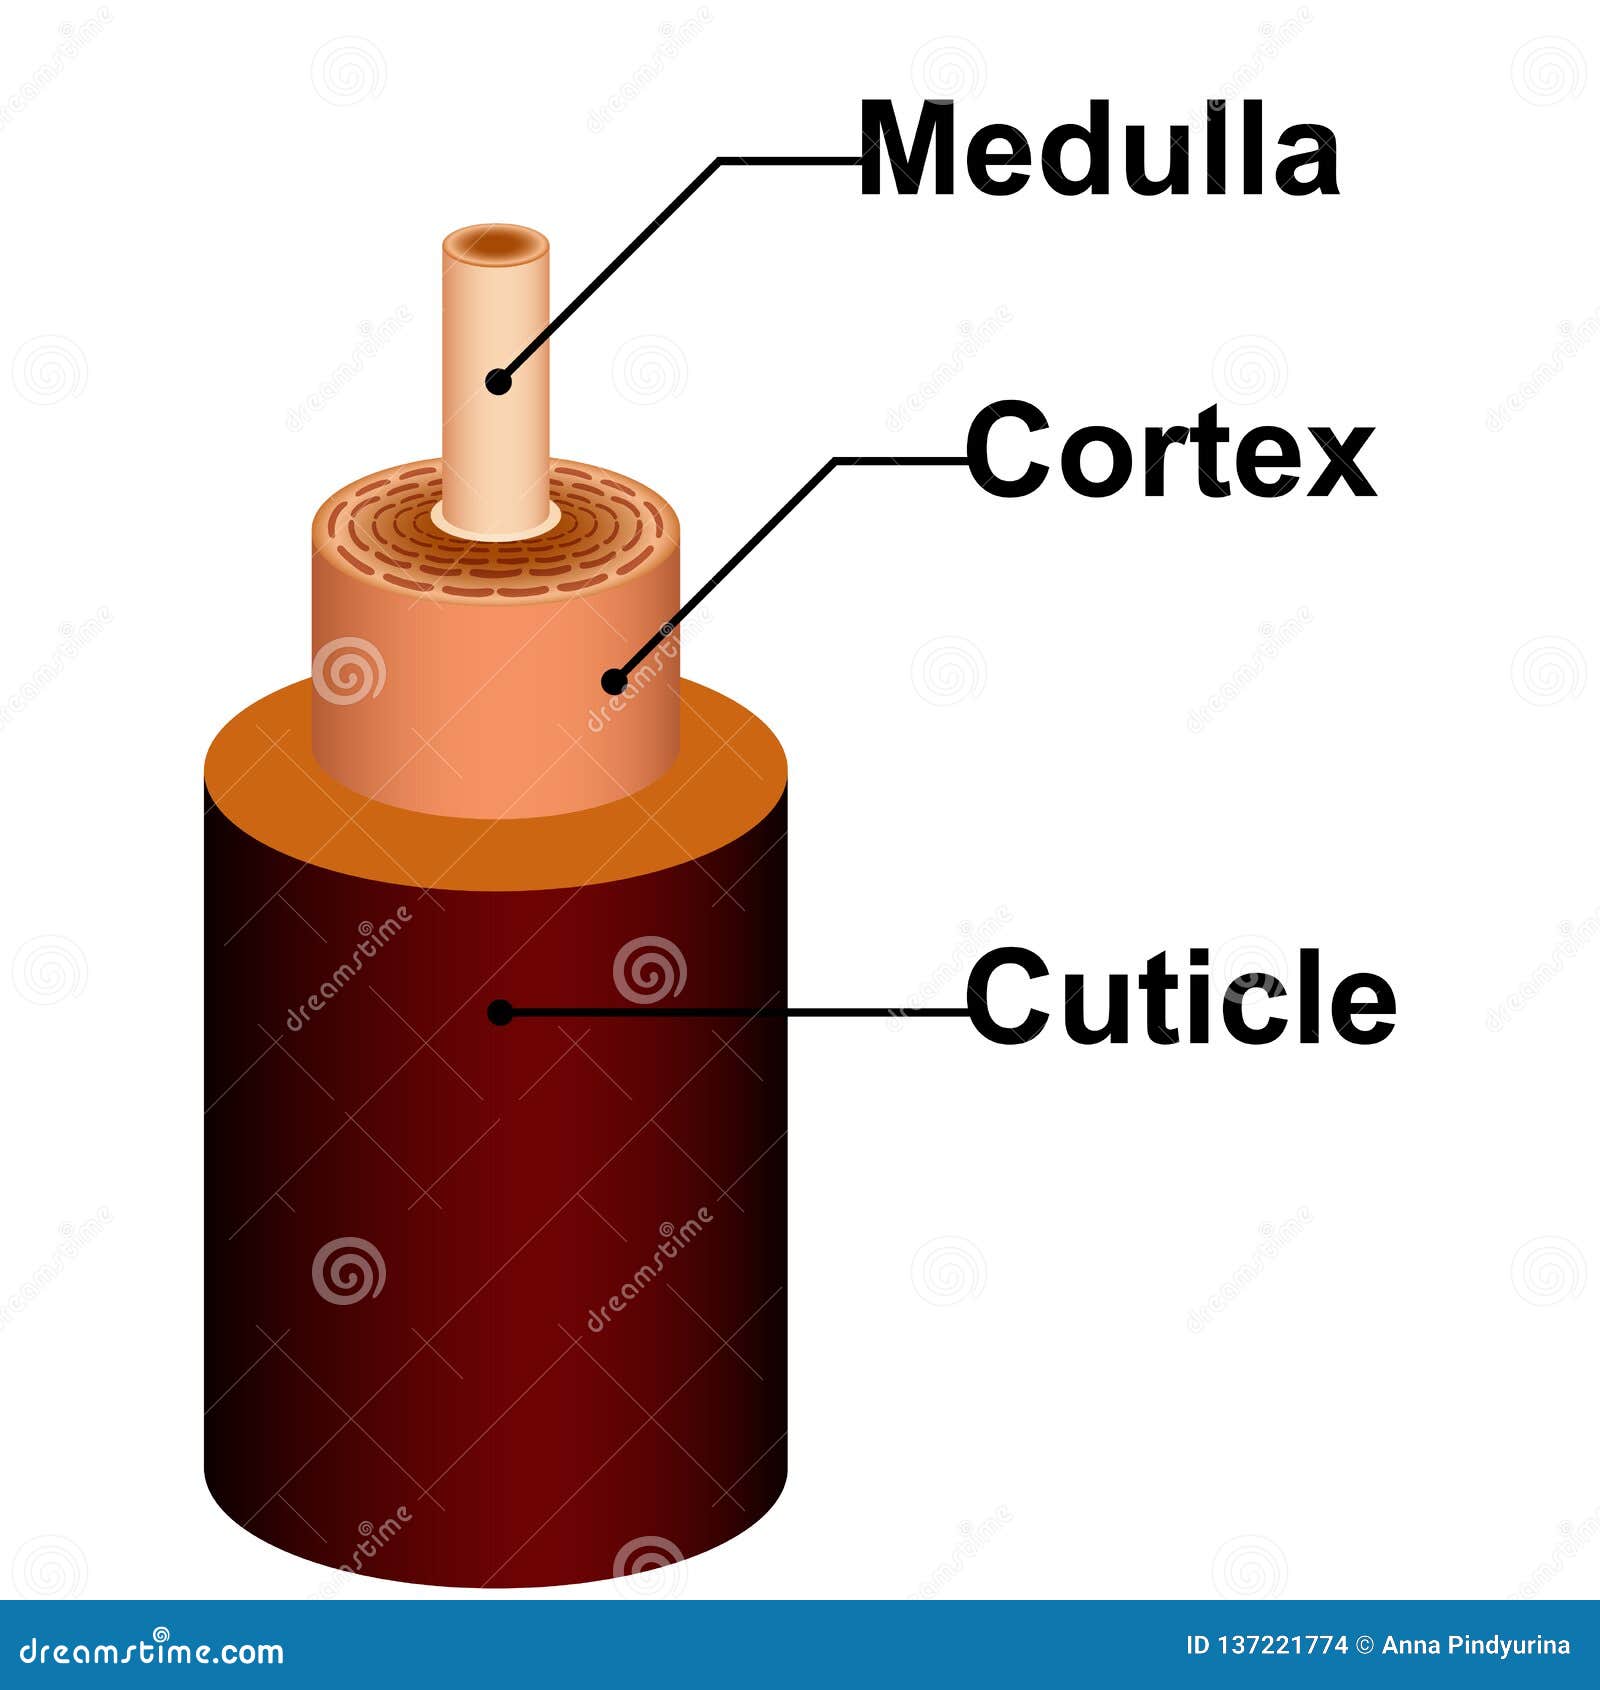 detailed hair structure anatomy of medulla cortex cuticle